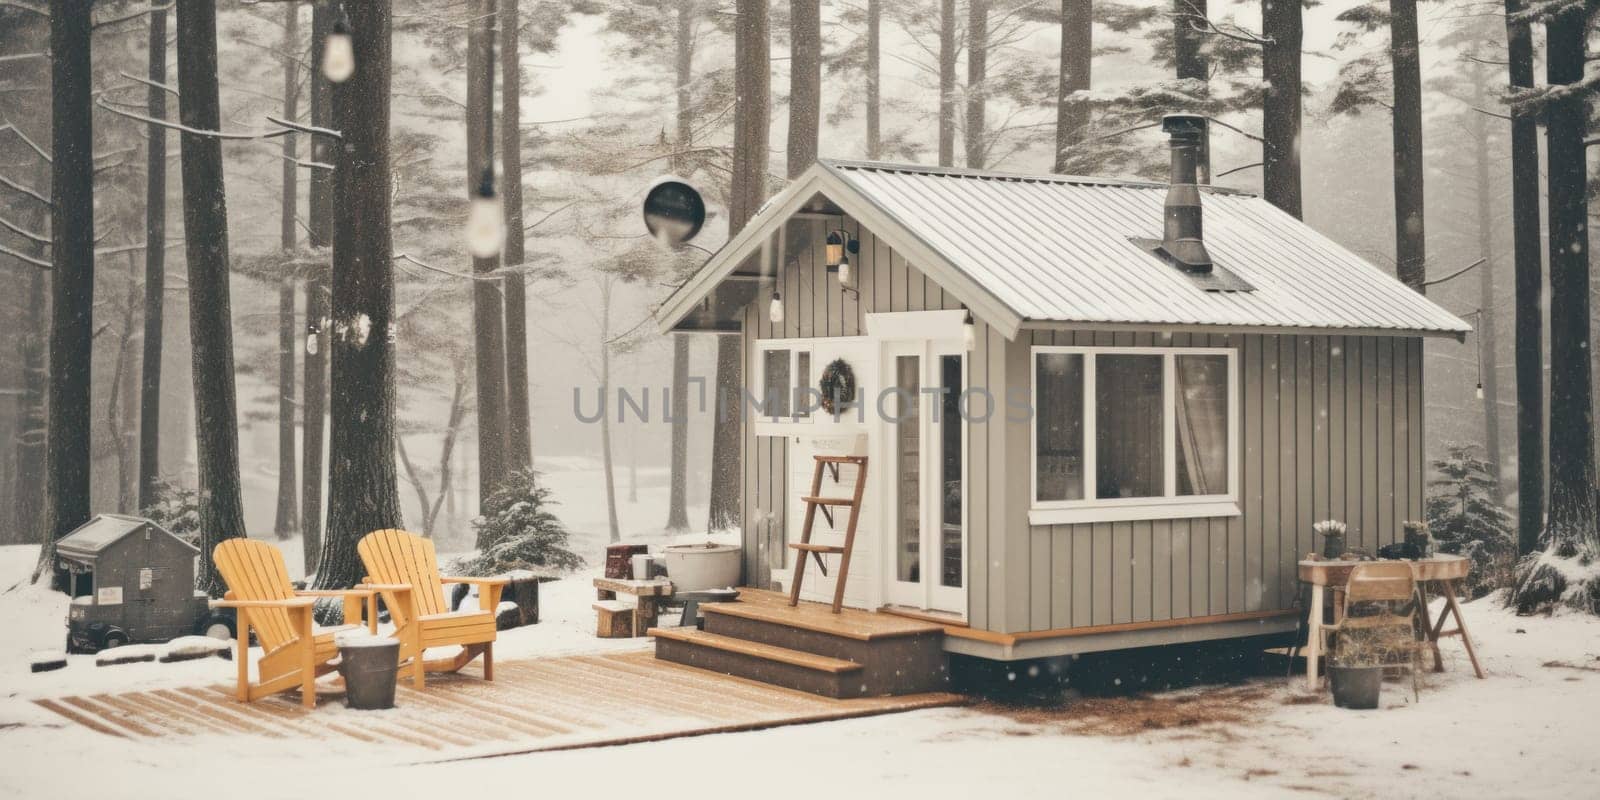 A small cabin sits in the middle of a snowy forest, AI by starush